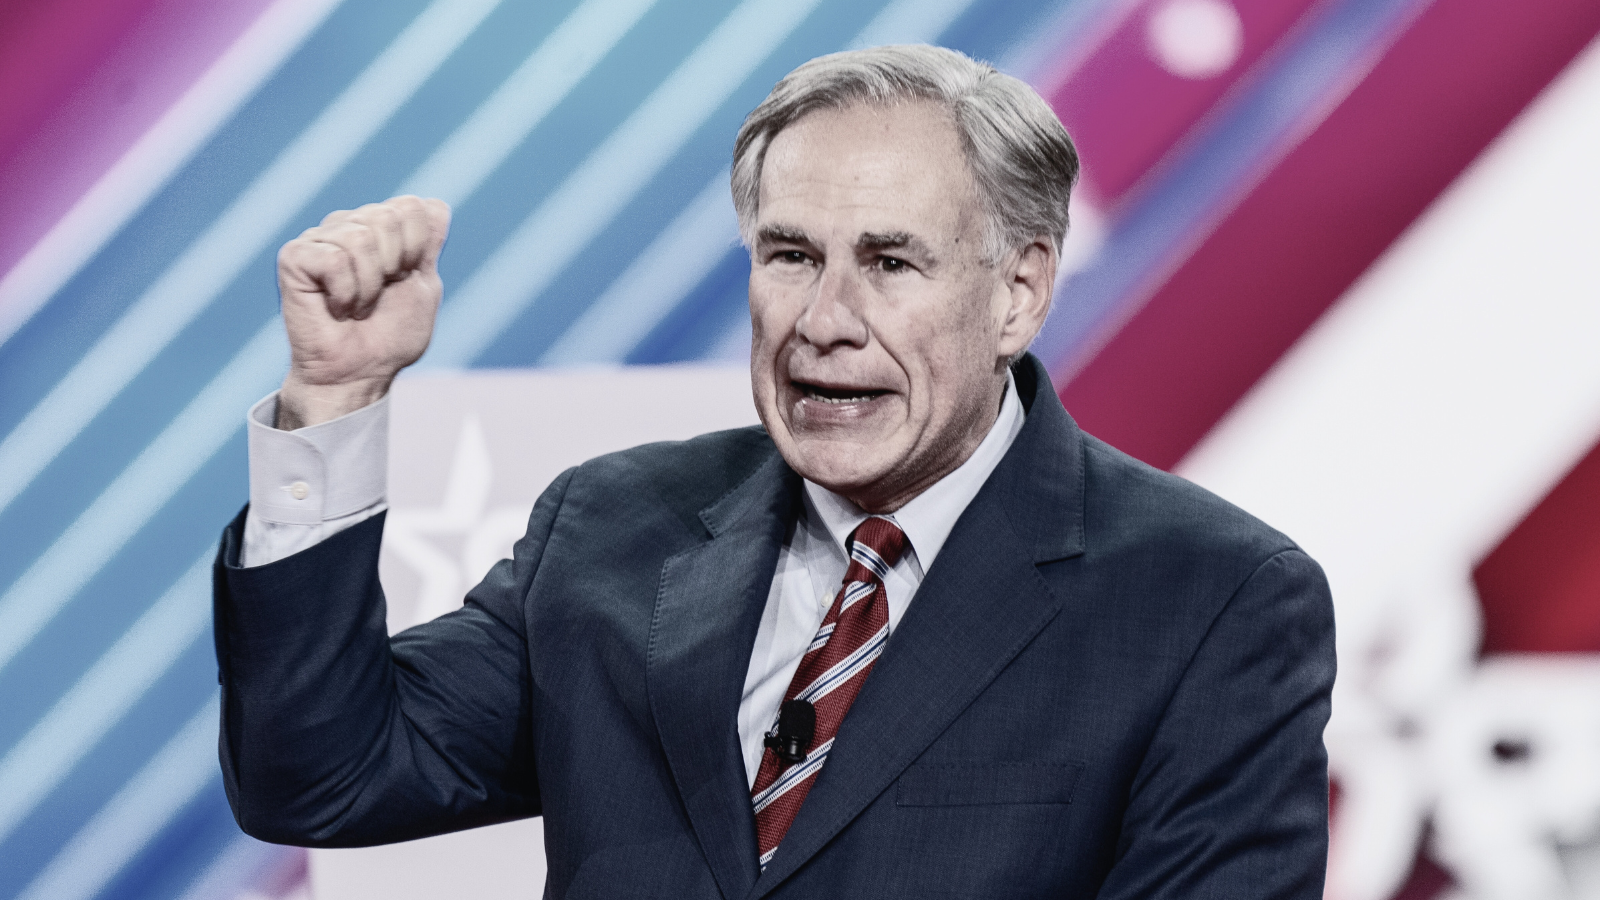 A photo of Governor Greg Abbott at a Texas GOP rally, dressed in a suit and pumping his fist. A filter has made the colors more washed out.